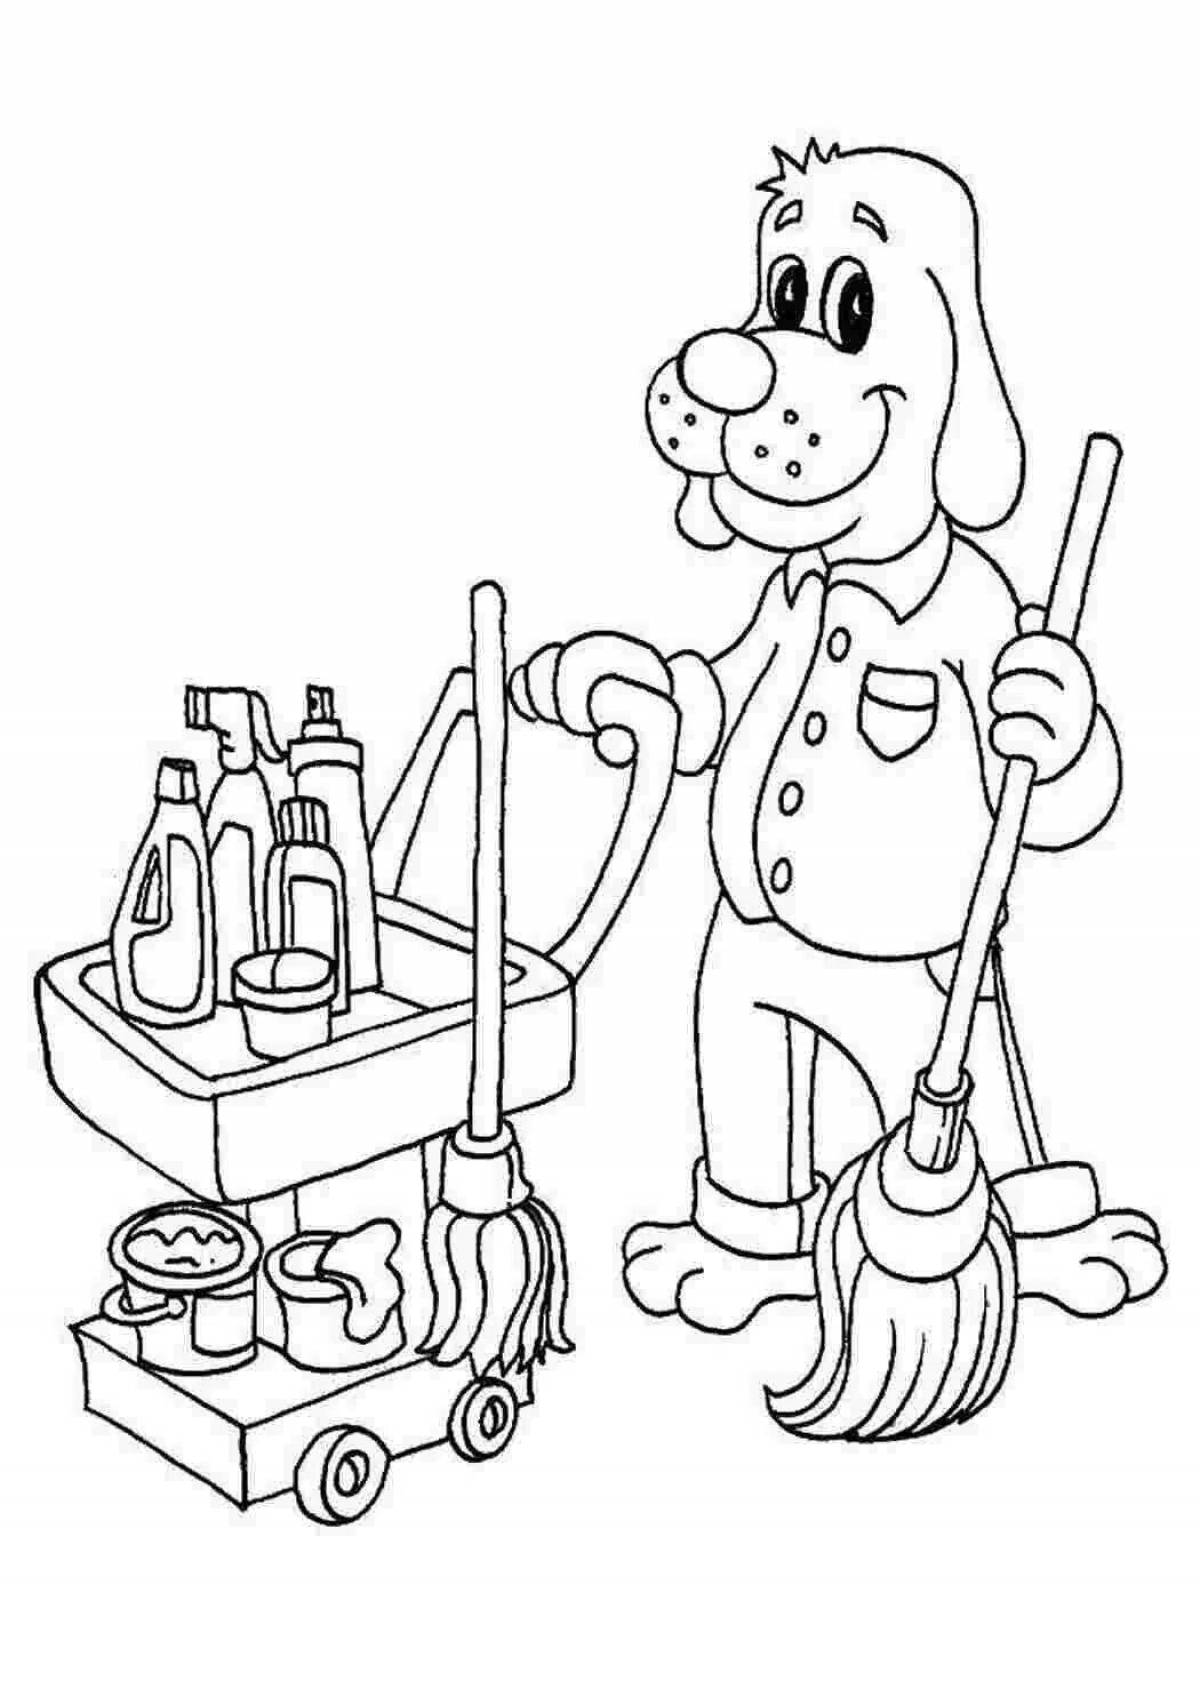 Coloring page joyful house cleaning for kids